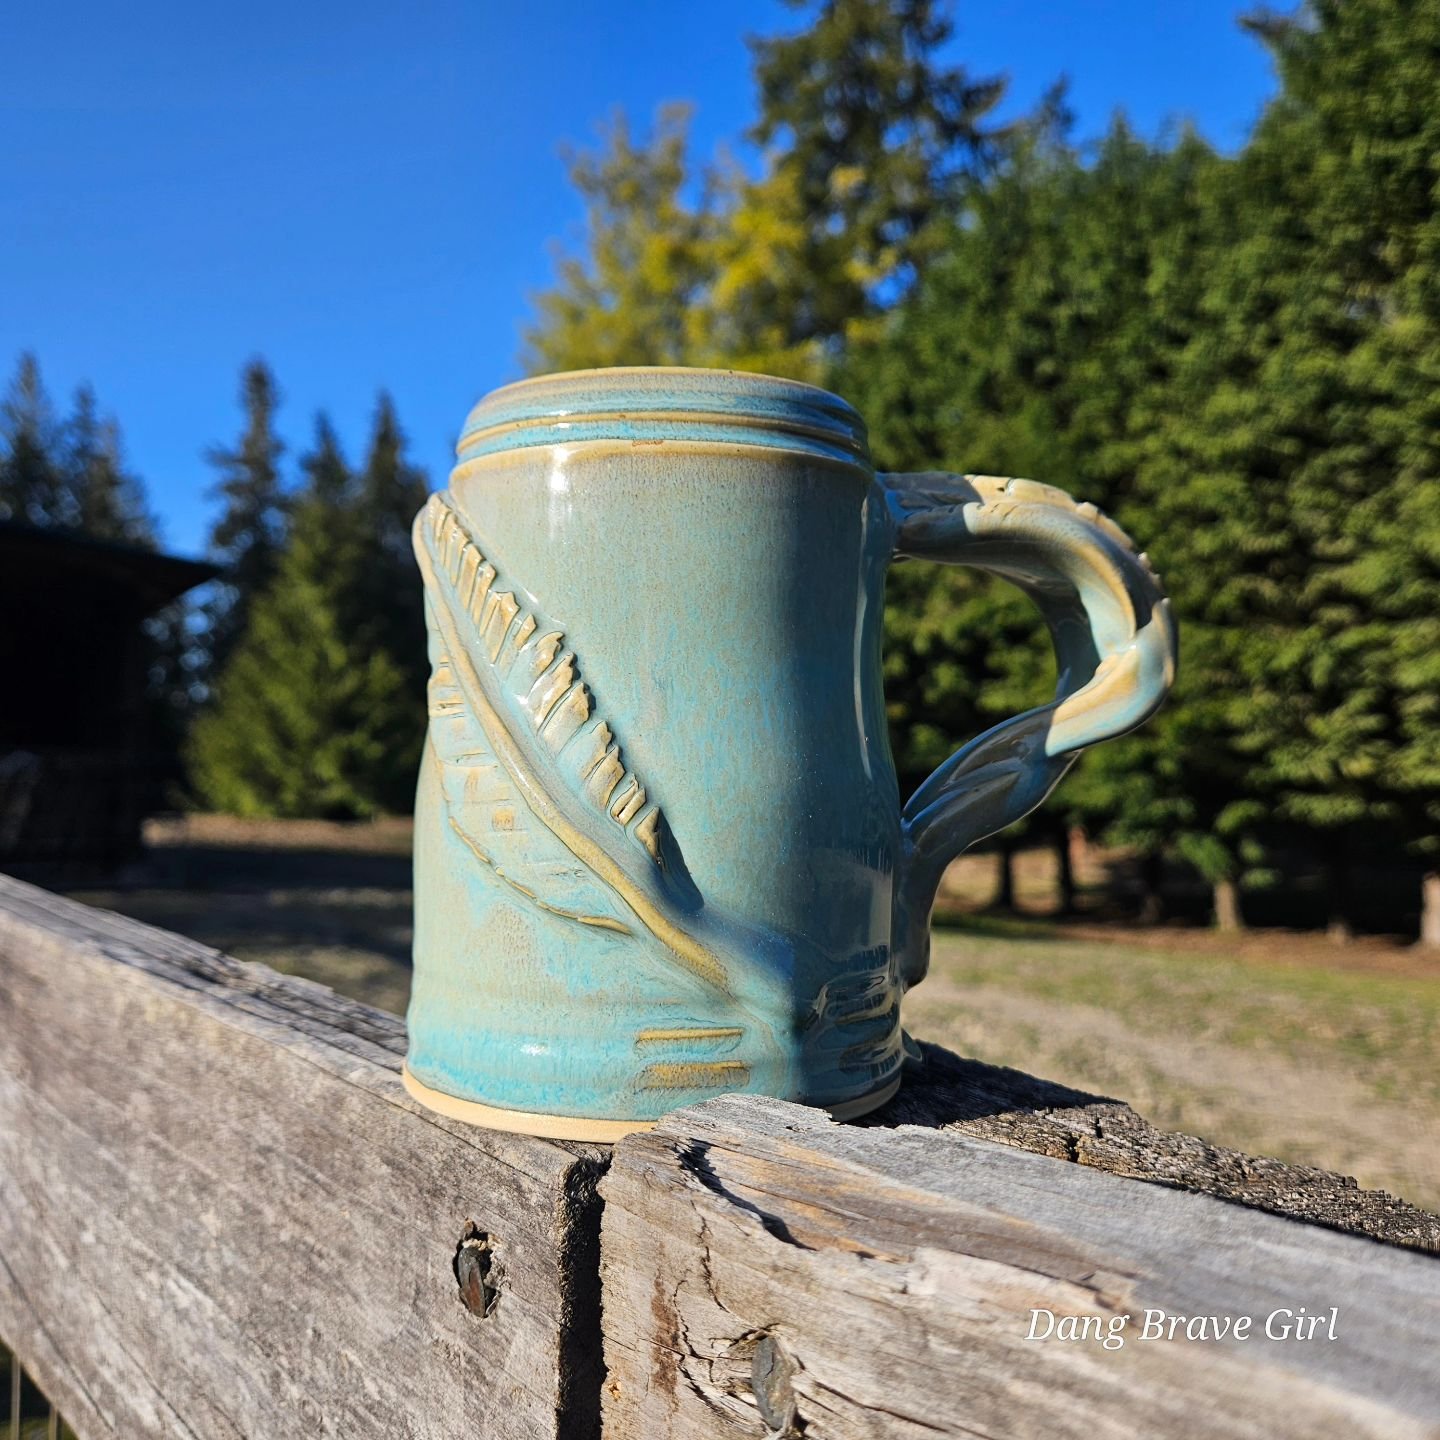 Who's ready for a DBH mug update? 

These 2 feather mugs are so unique and obviously ooak... look at those handle details! 

And the cross mug came out of the kiln with some extra bubbles, and while still completely usable and cool as is, I will disc